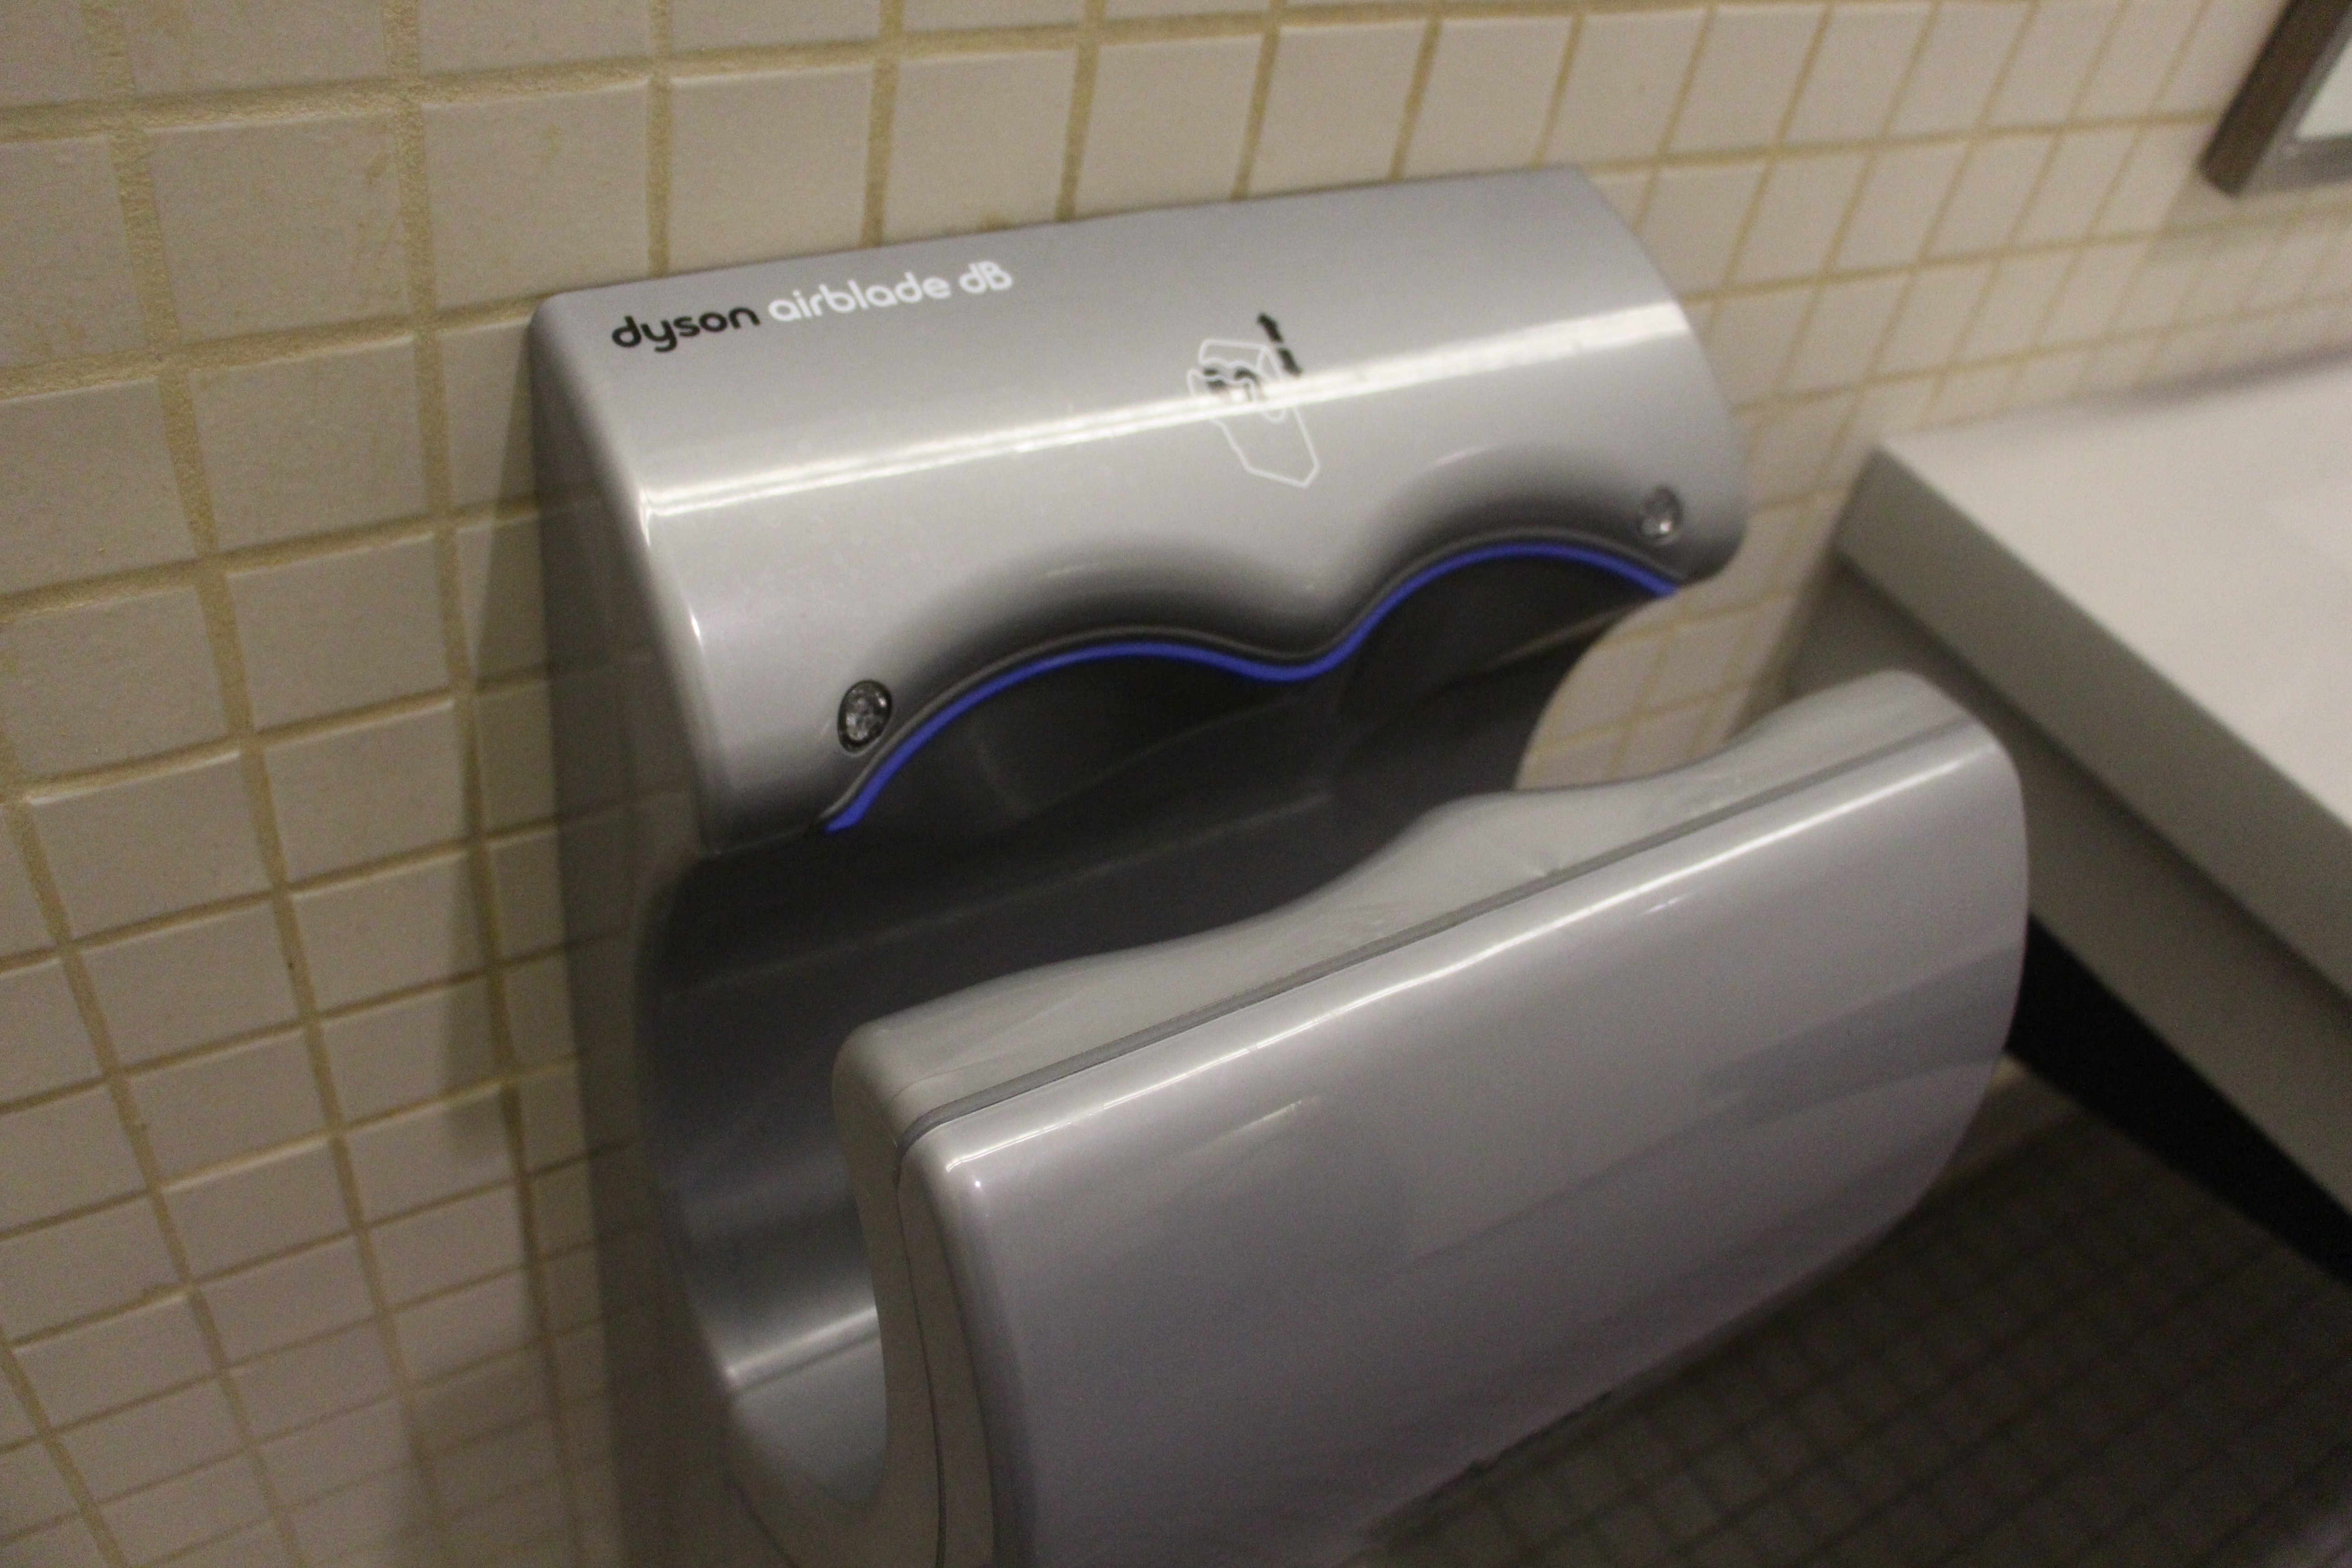 Hand dryers spread bacteria, affect health on campus